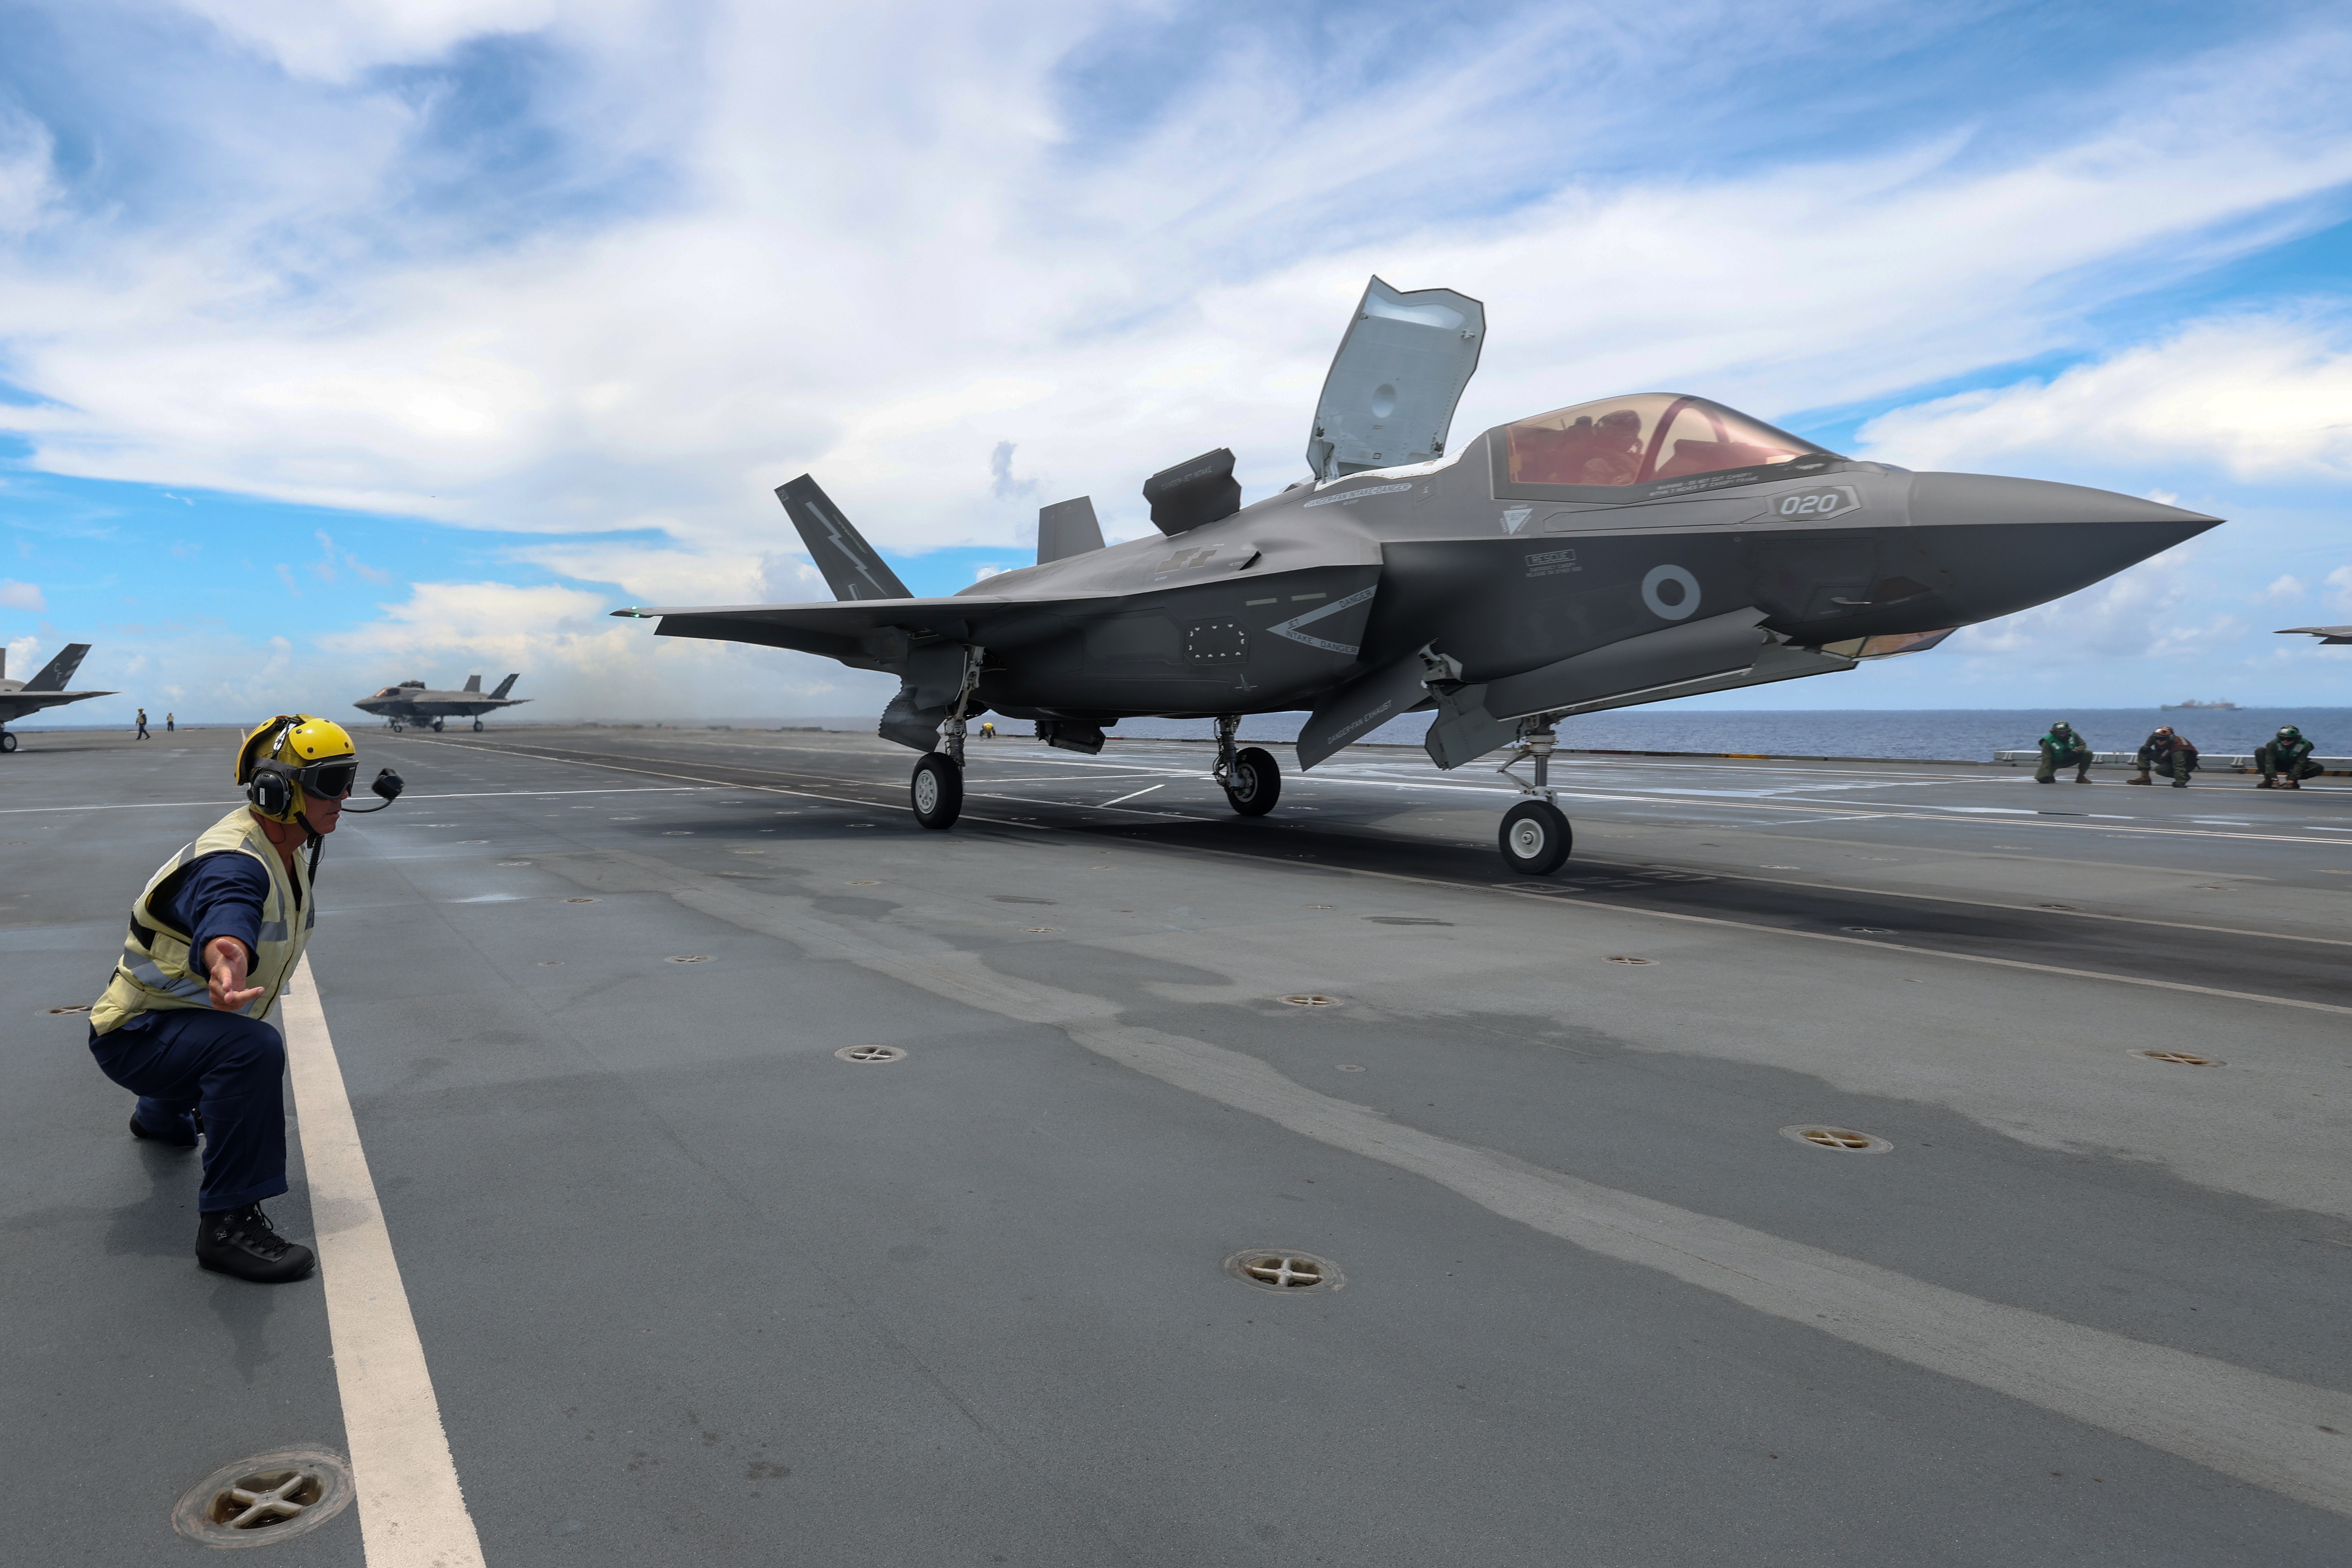 F-35B Lightning on runway being guided by Personnel.